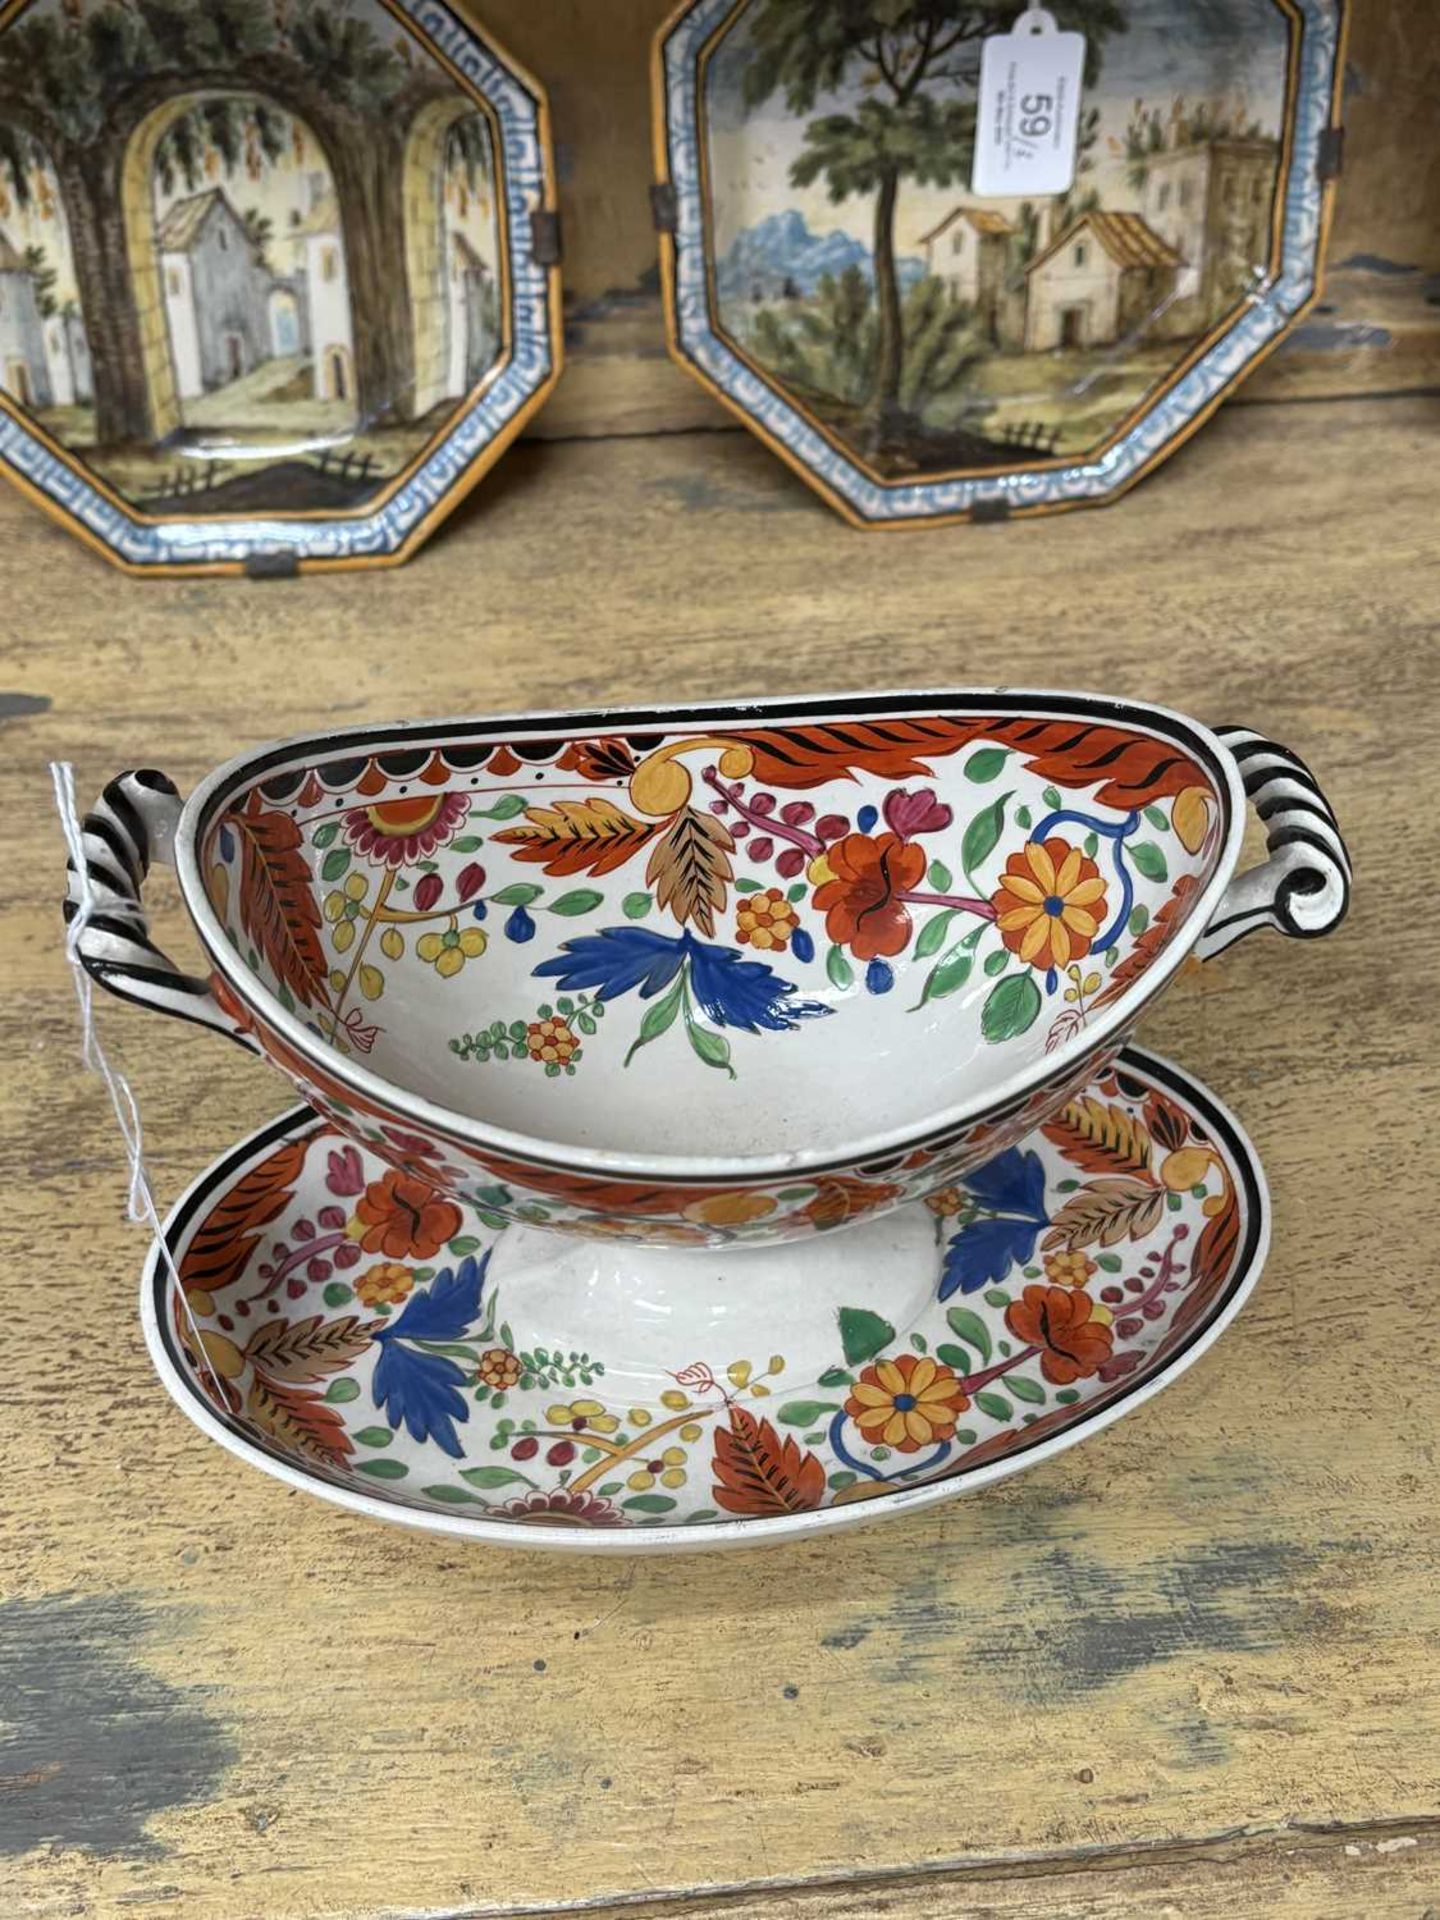 A LATE 18TH CENTURY SPODE PARTIAL DINNER SERVICE - Image 20 of 21